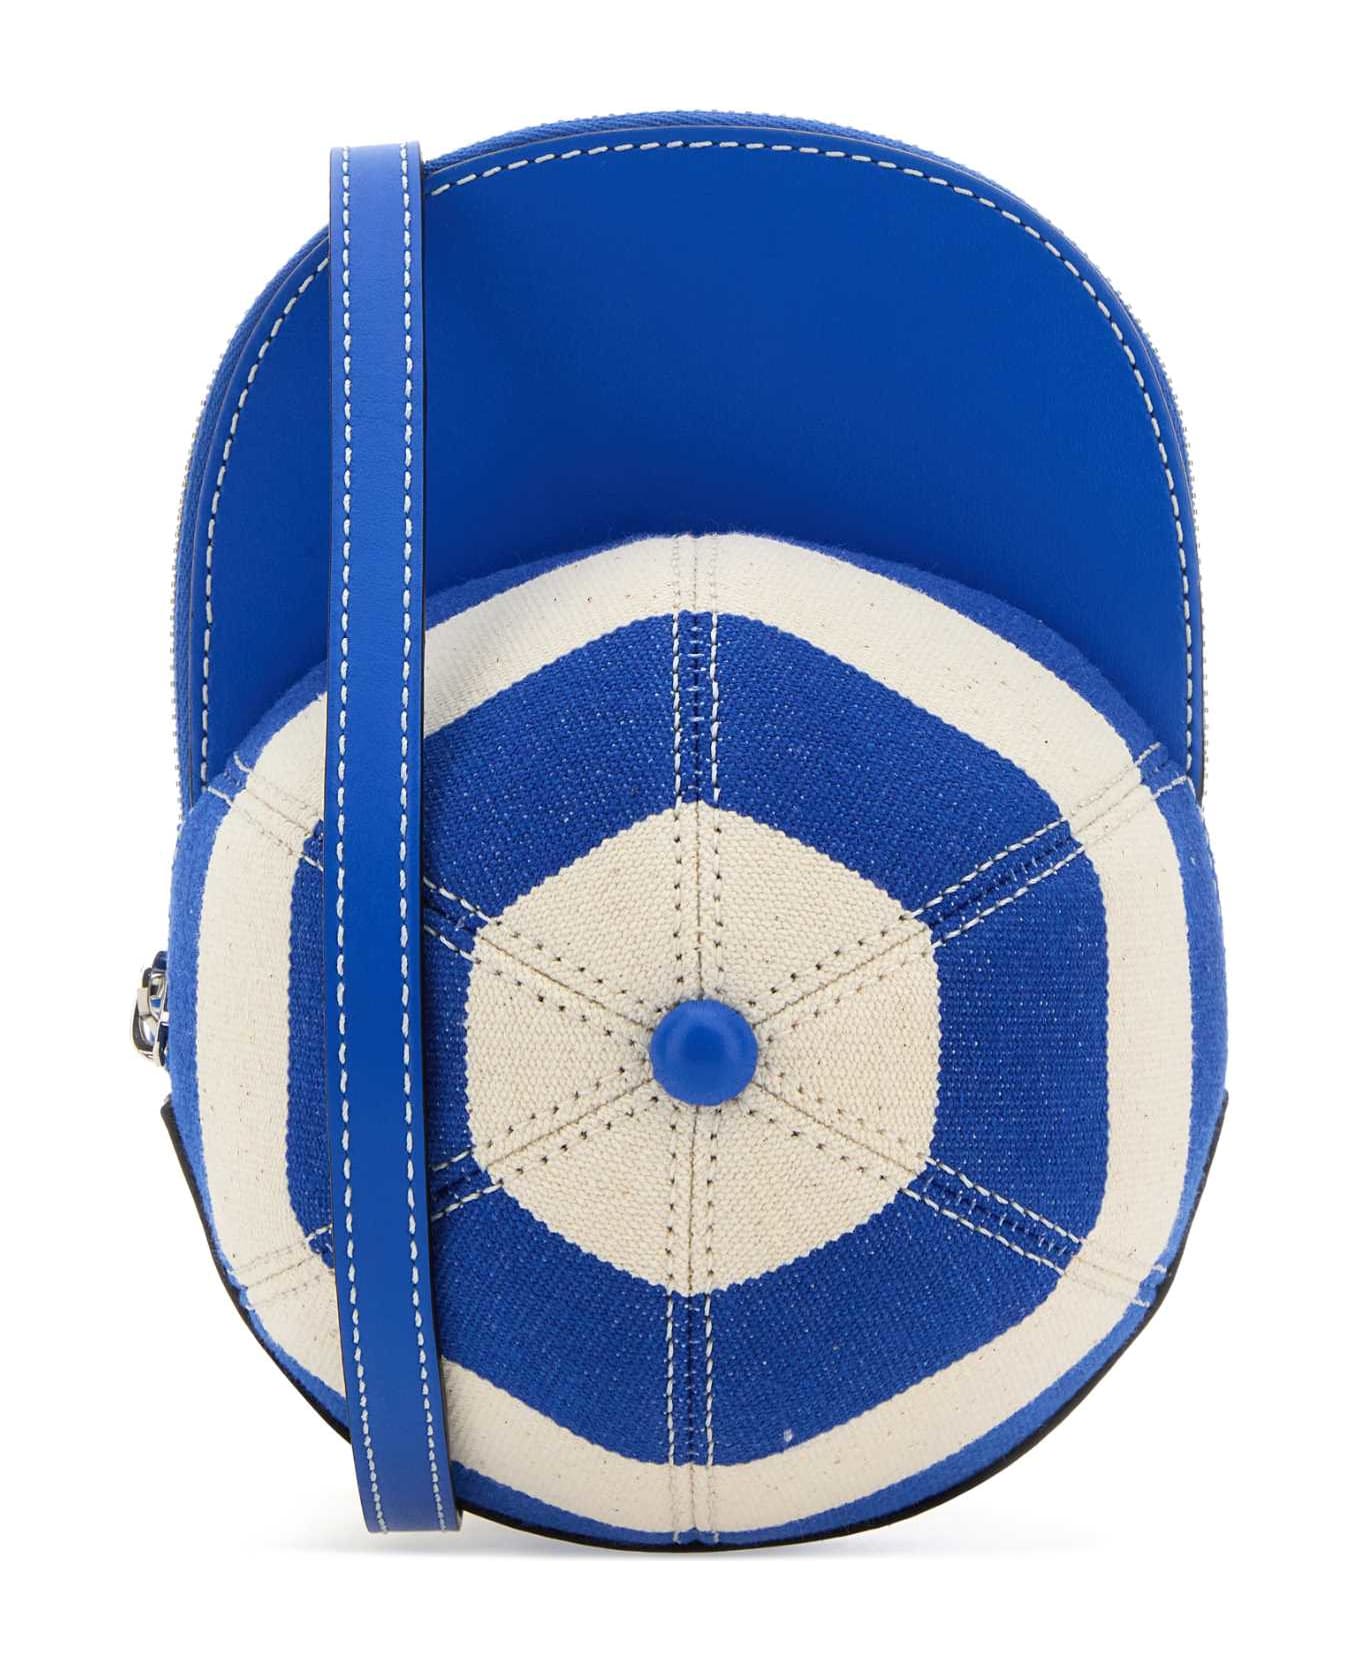 J.W. Anderson Embroidered Canvas And Leather Midi Cap Crossbody Bag - BLUEWHITE